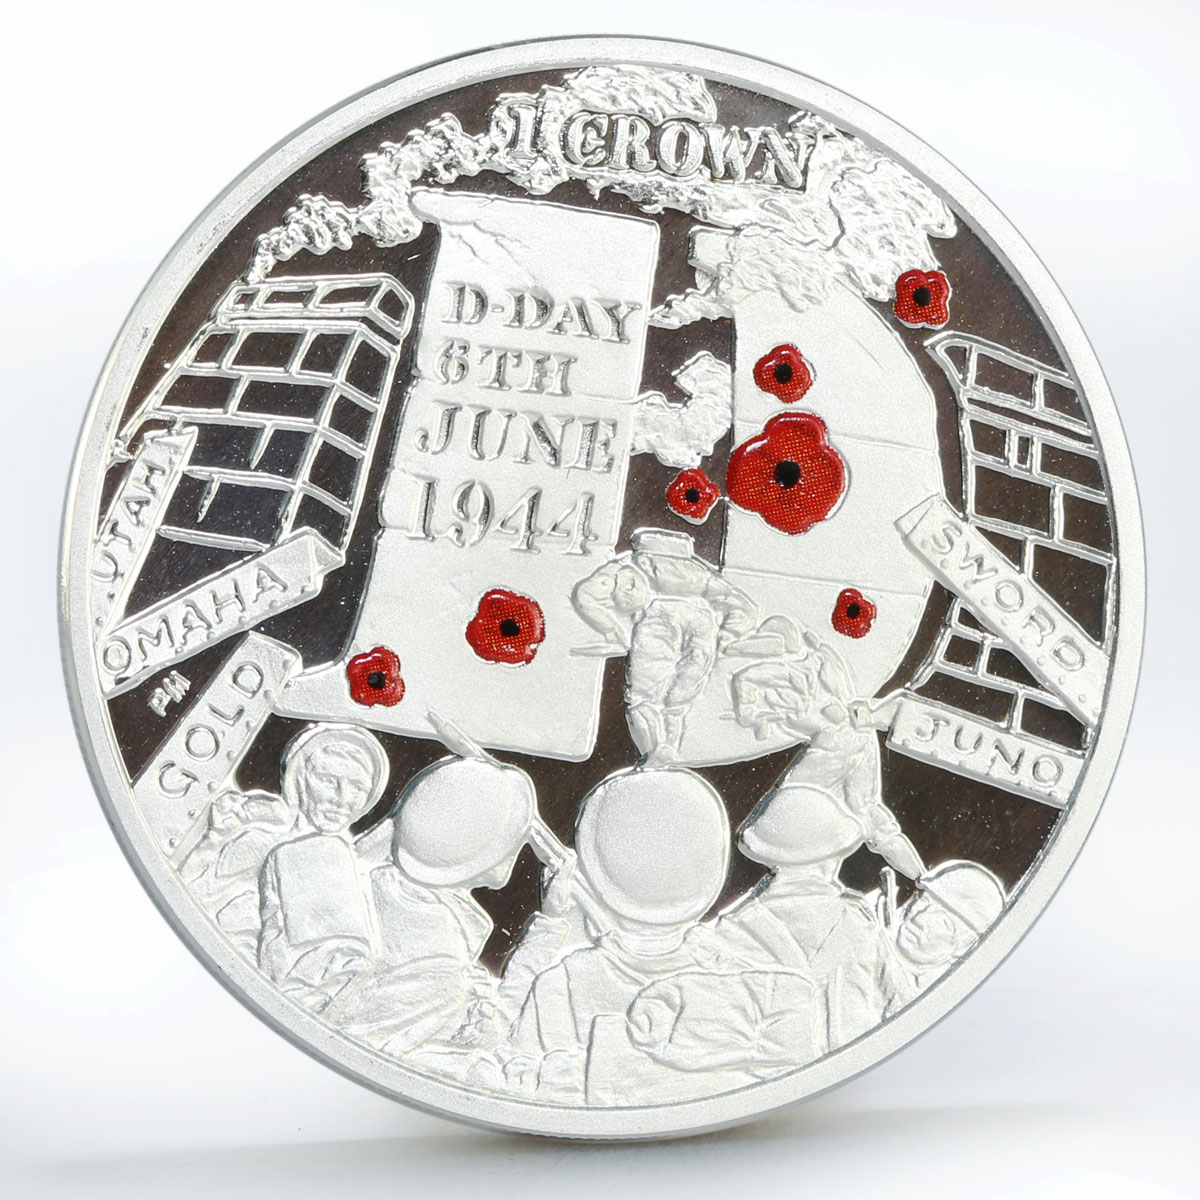 Isle of Man 1 crown 70th Anniversary of D Day WWII Soldiers silver coin 2014